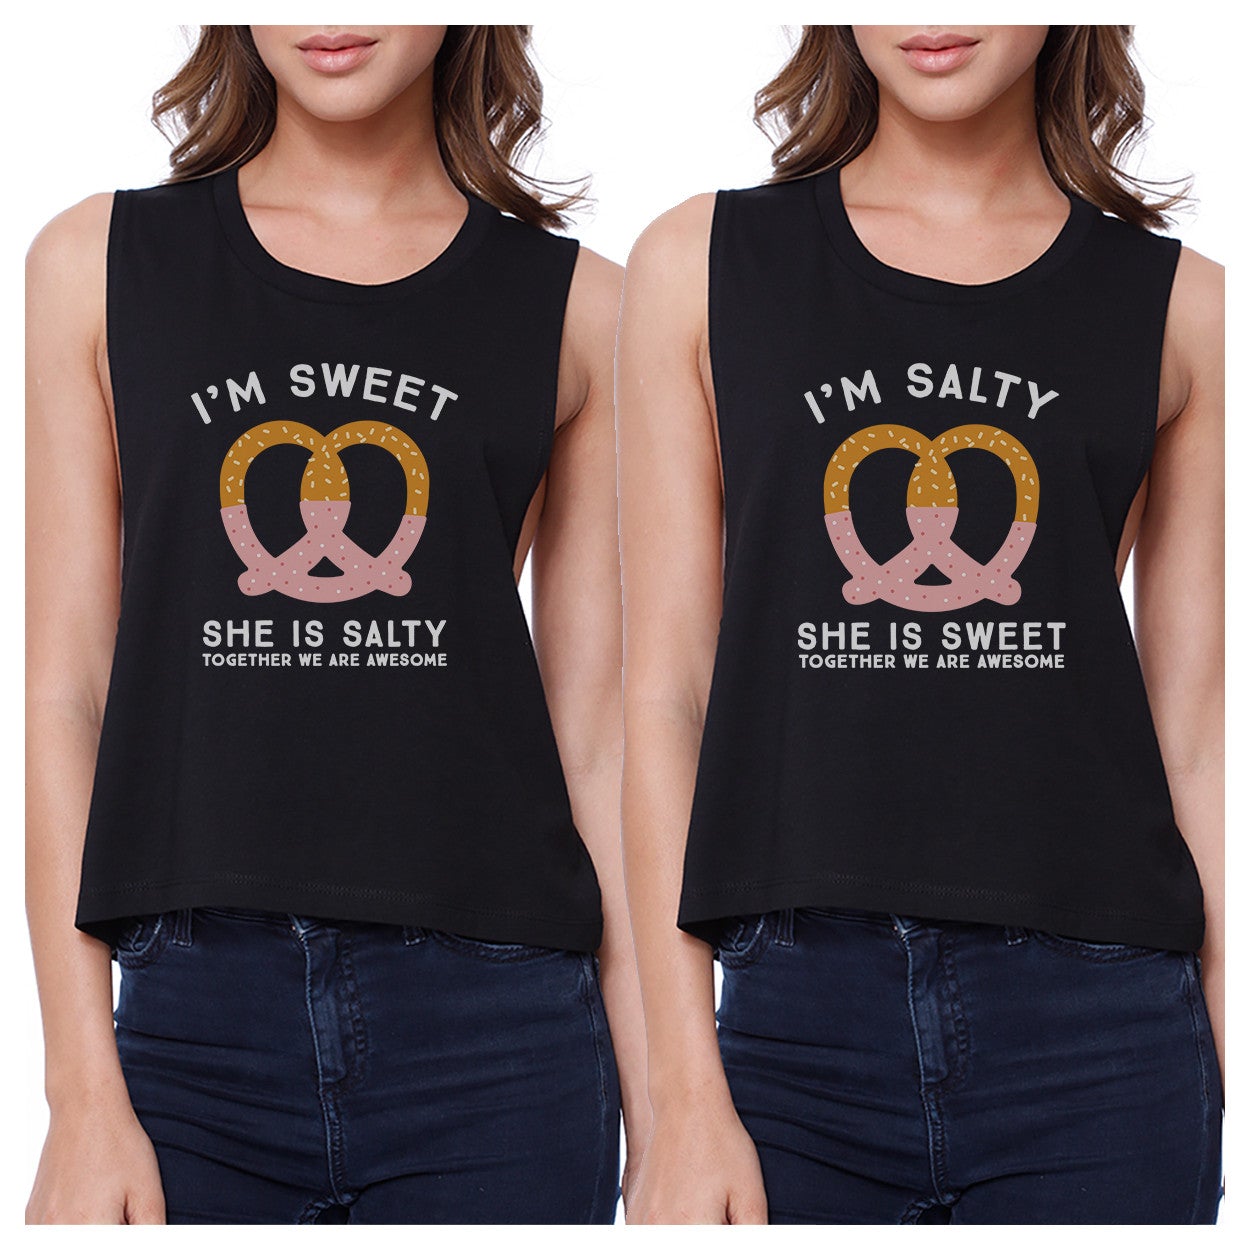 Sweet And Salty BFF Matching Black Crop Tops